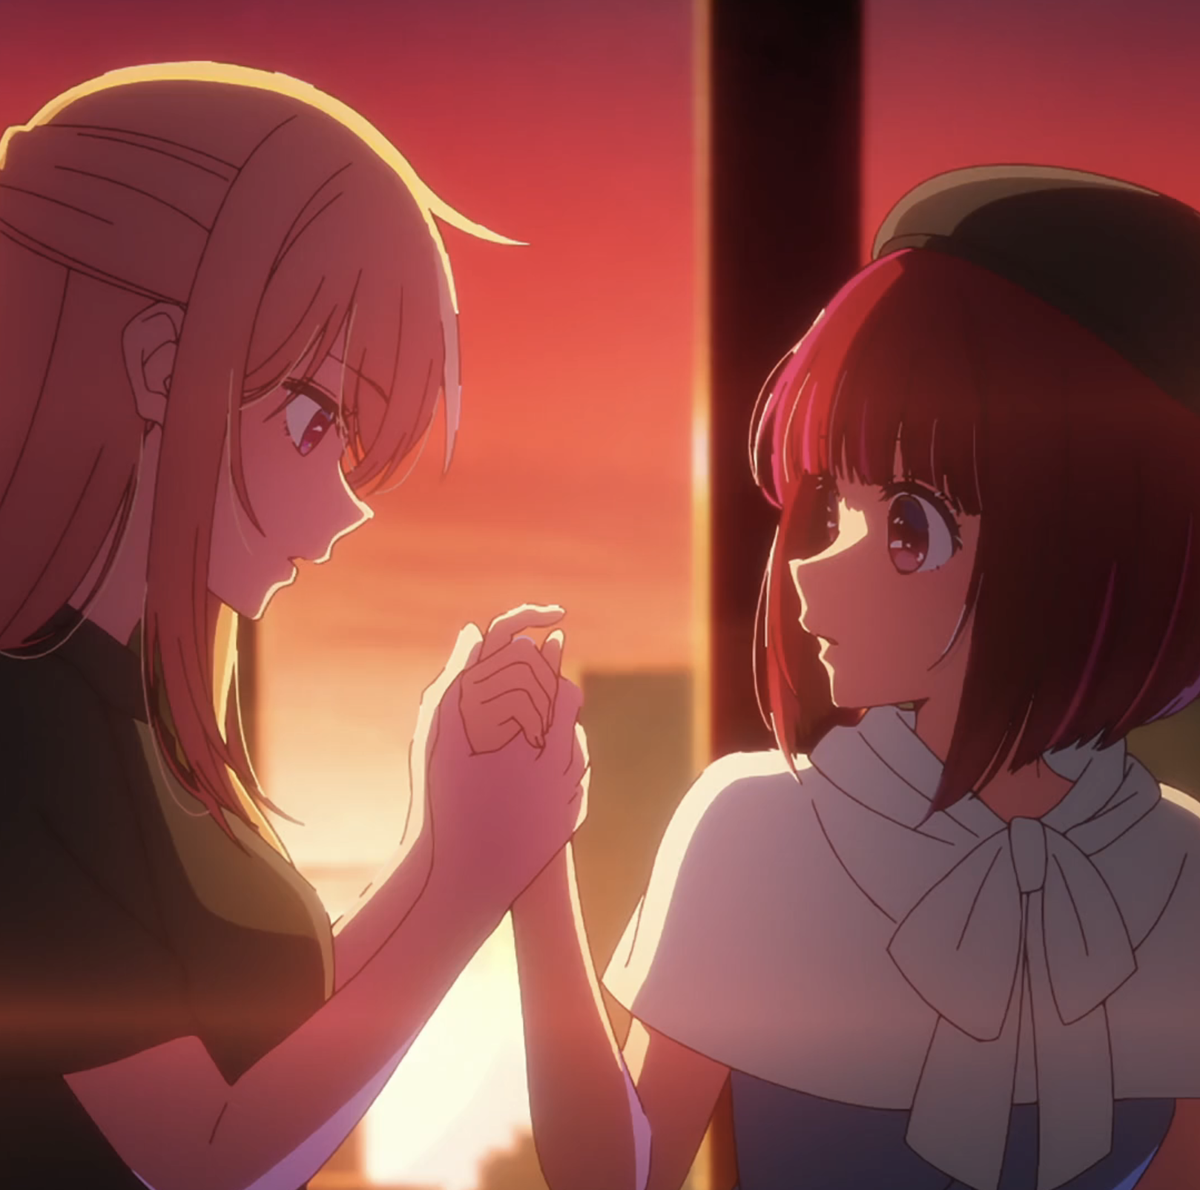 Oshi no Ko season 2 release date, cast, plot and everything you